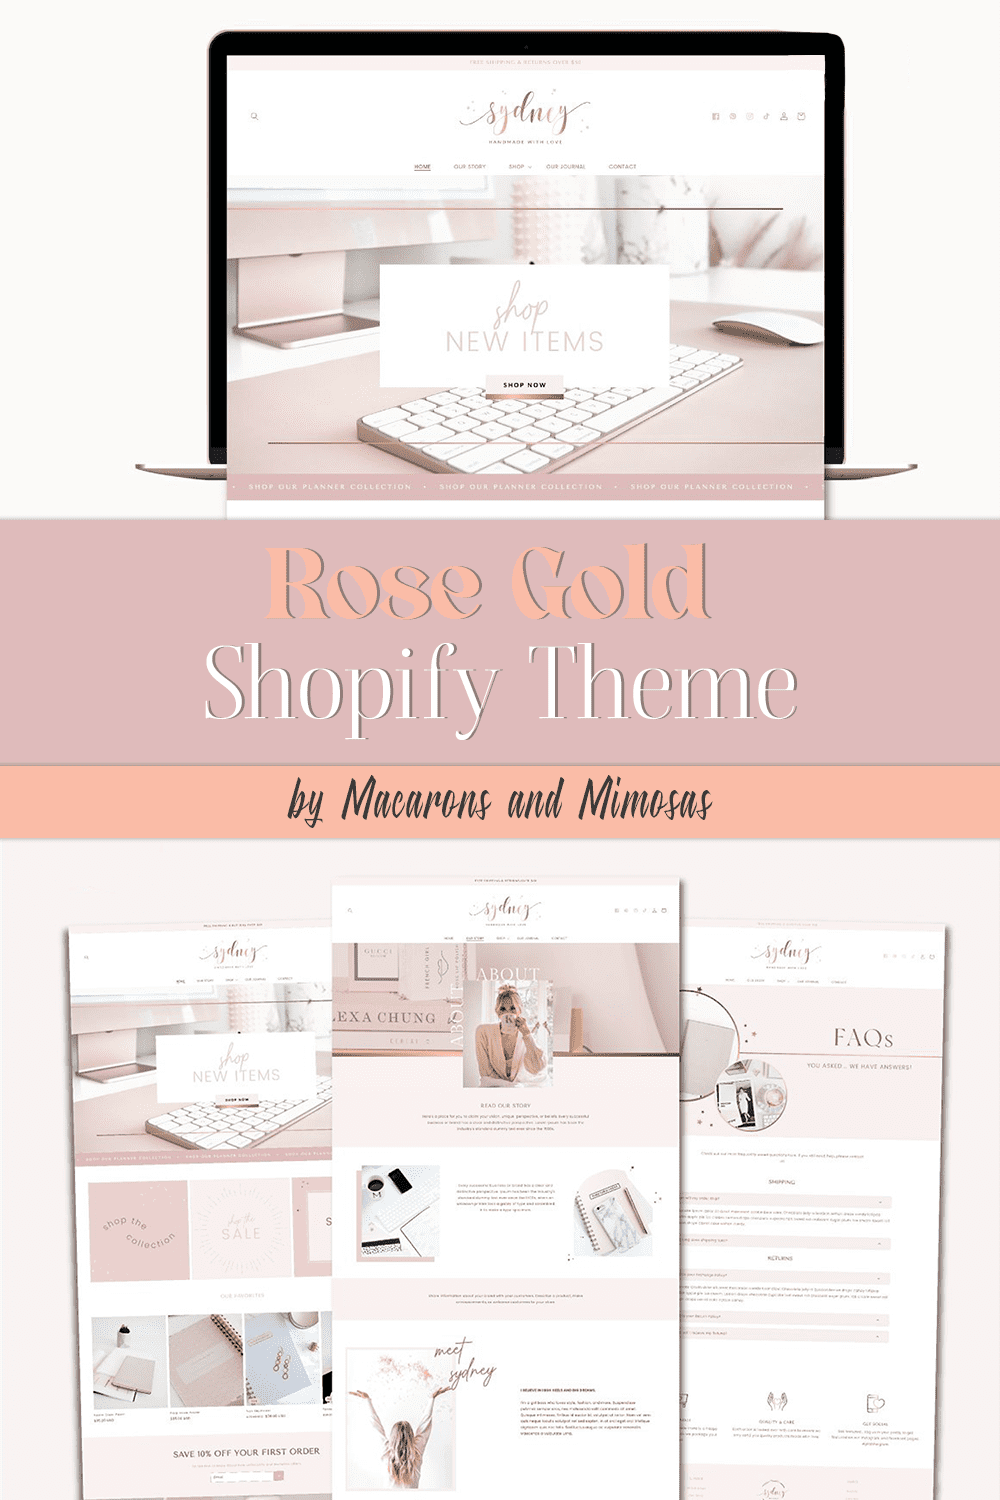 Rose Gold Shopify Theme - pinterest image preview.